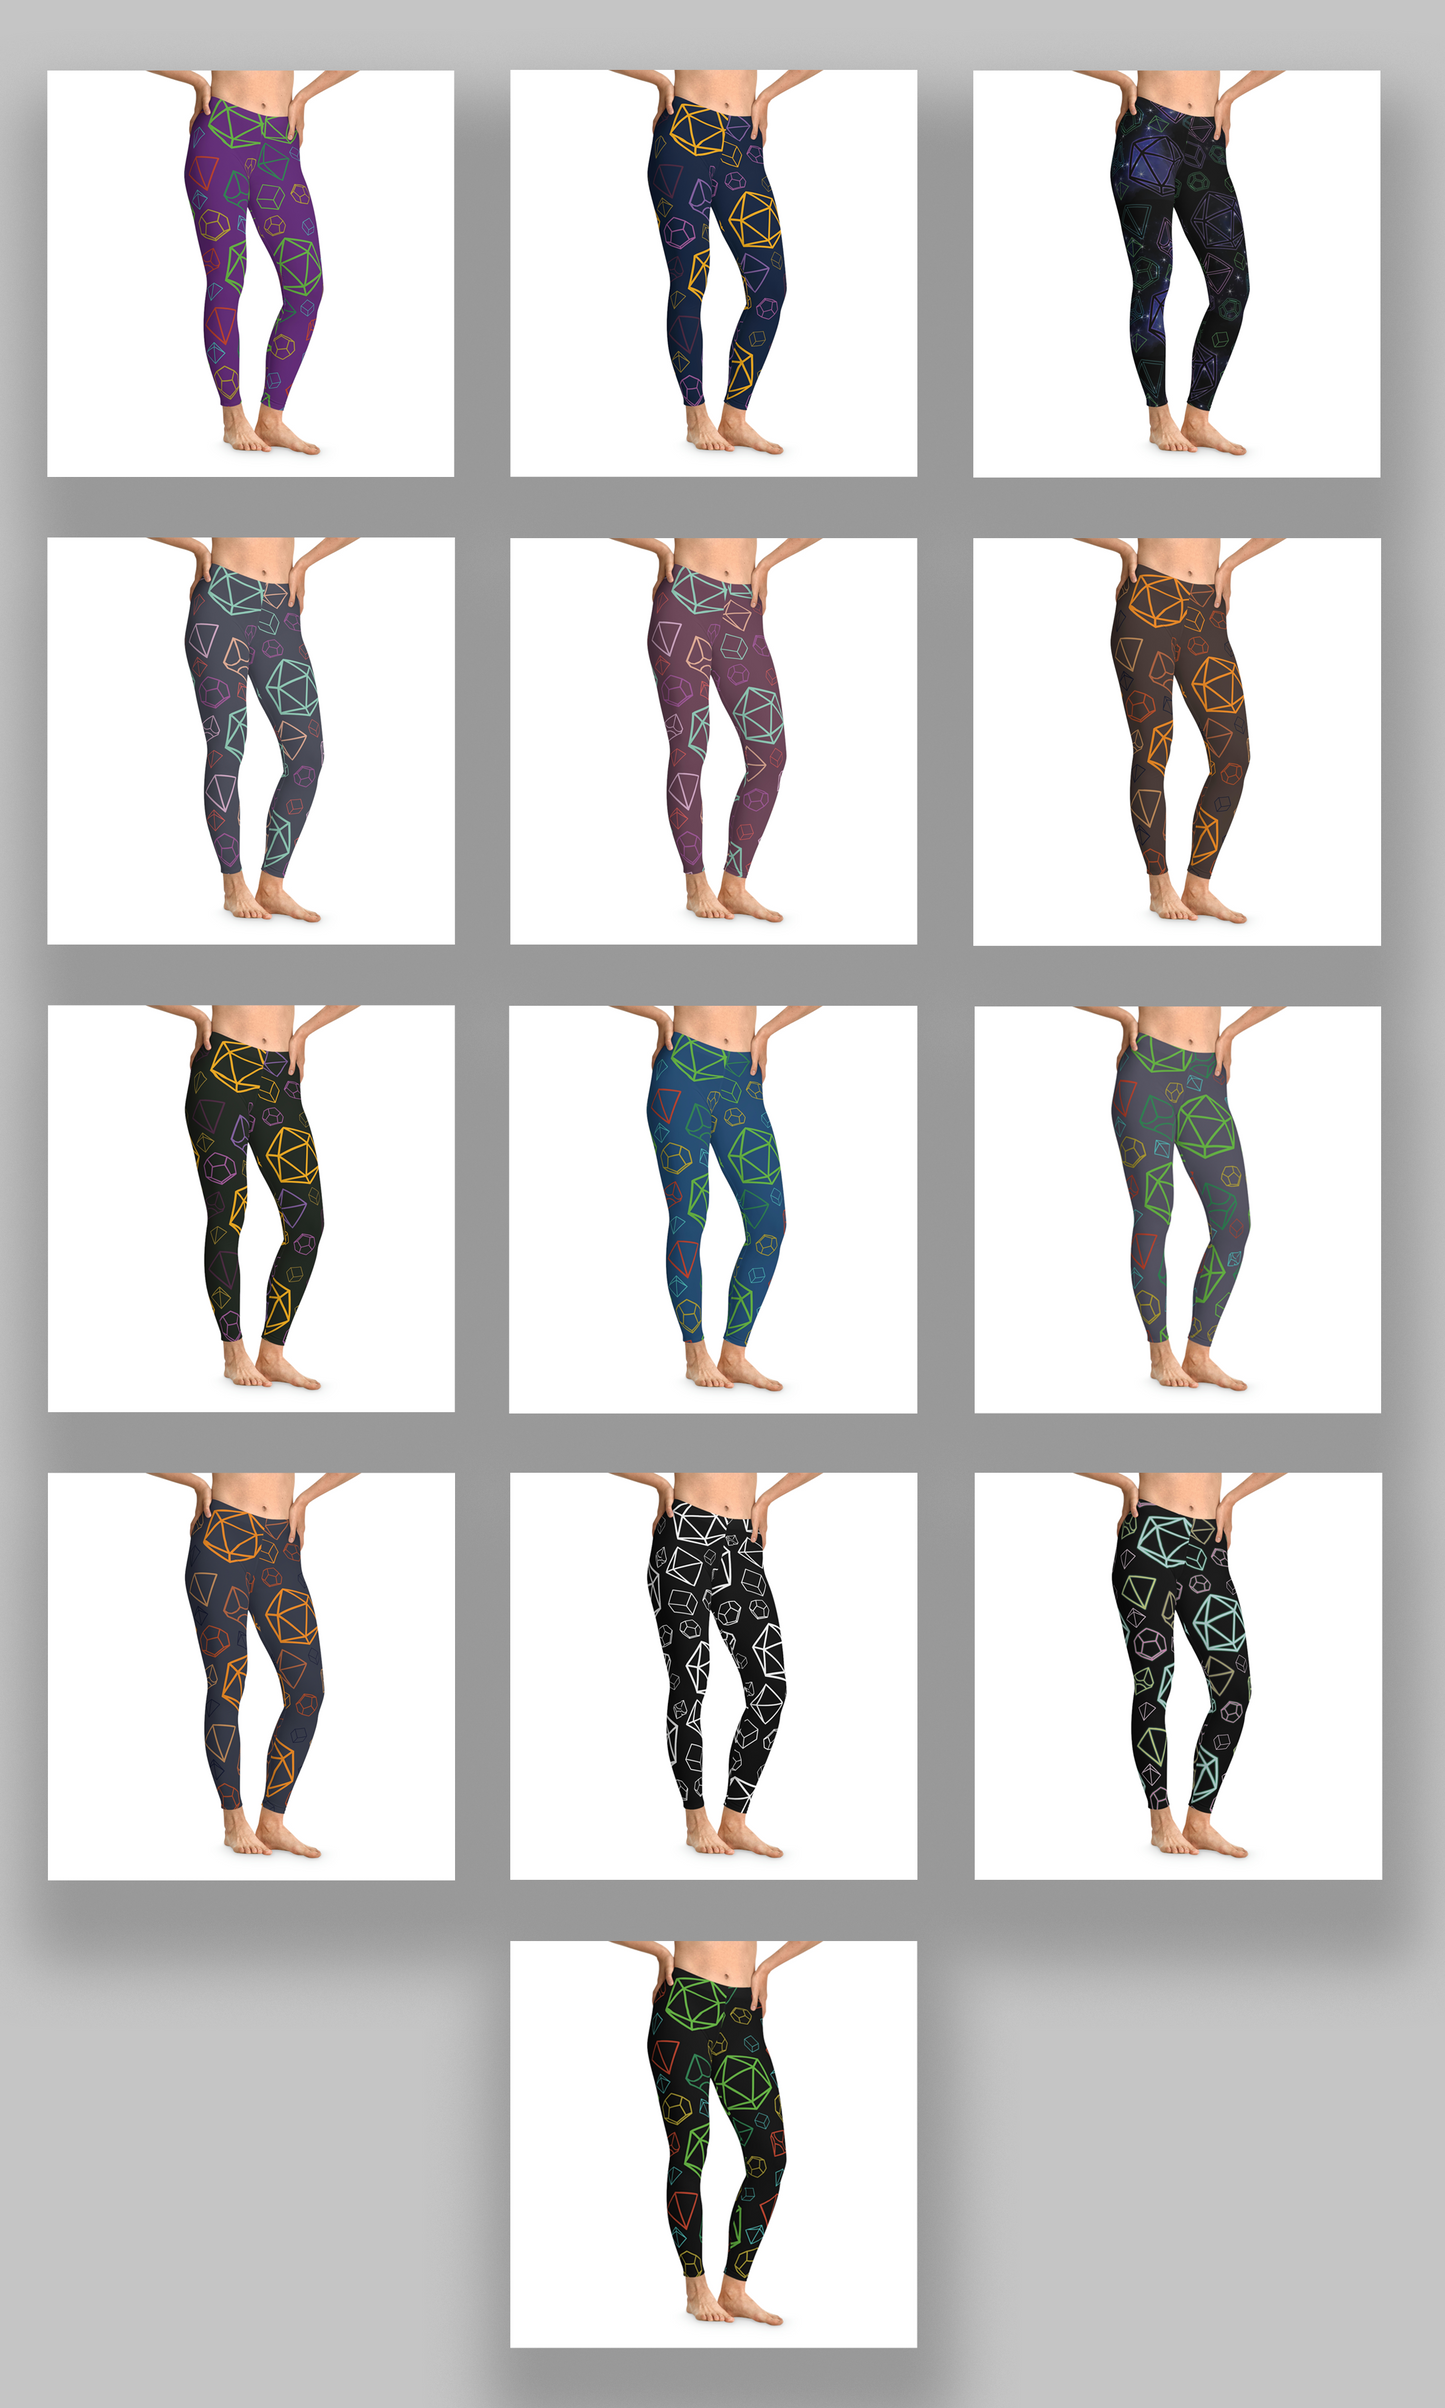 D20 Dice Leggings for the Ultimate D&D Fan (AOP) - Perfect for Gaming or Everyday Wear